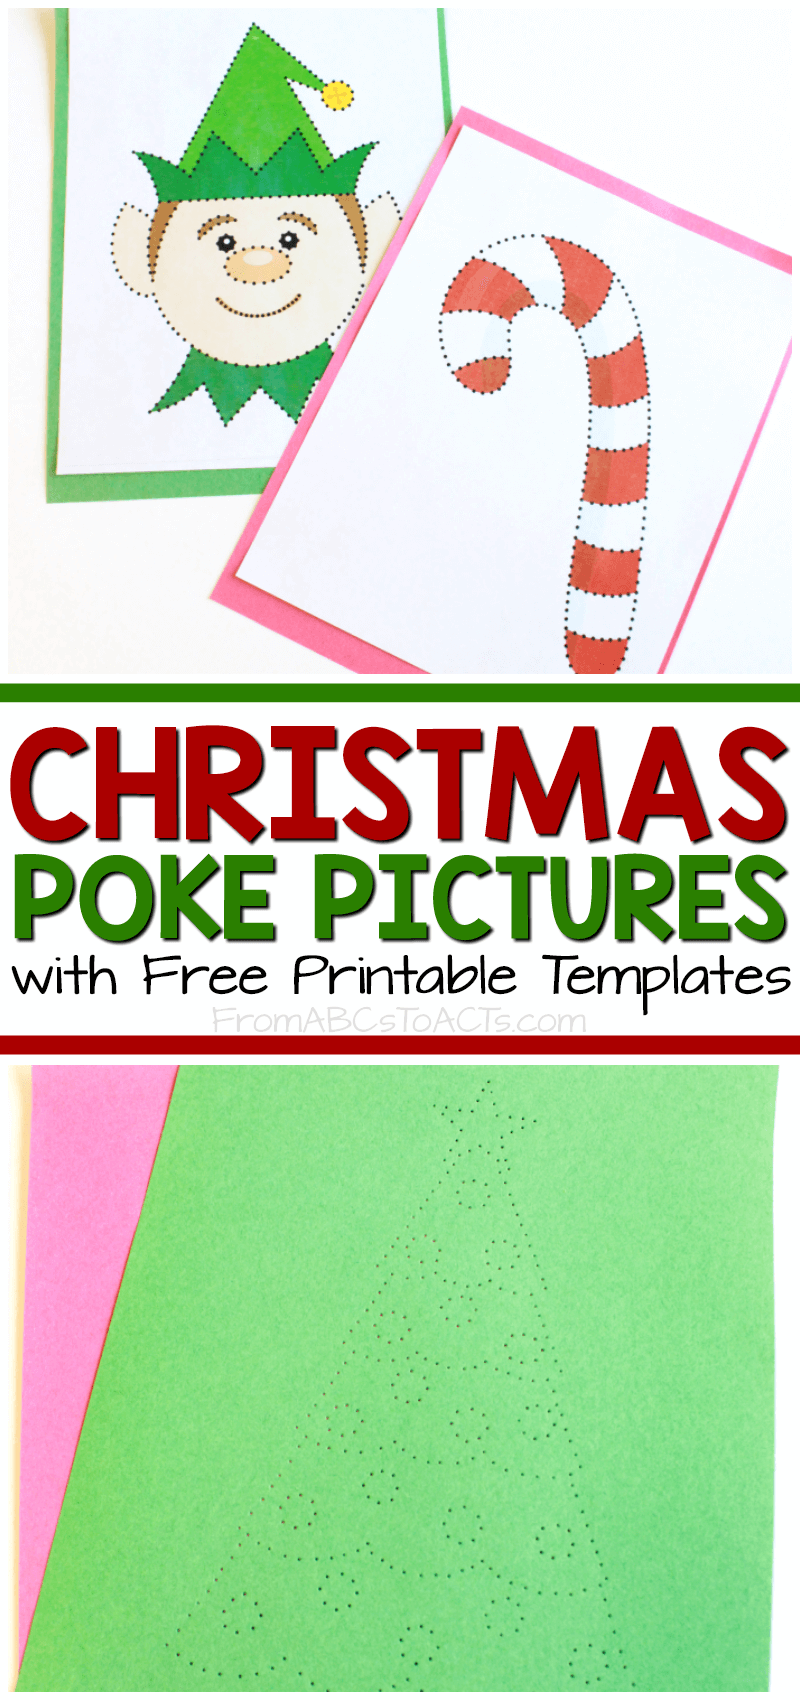 Christmas Poke Pictures With Printable Templates From ABCs To ACTs